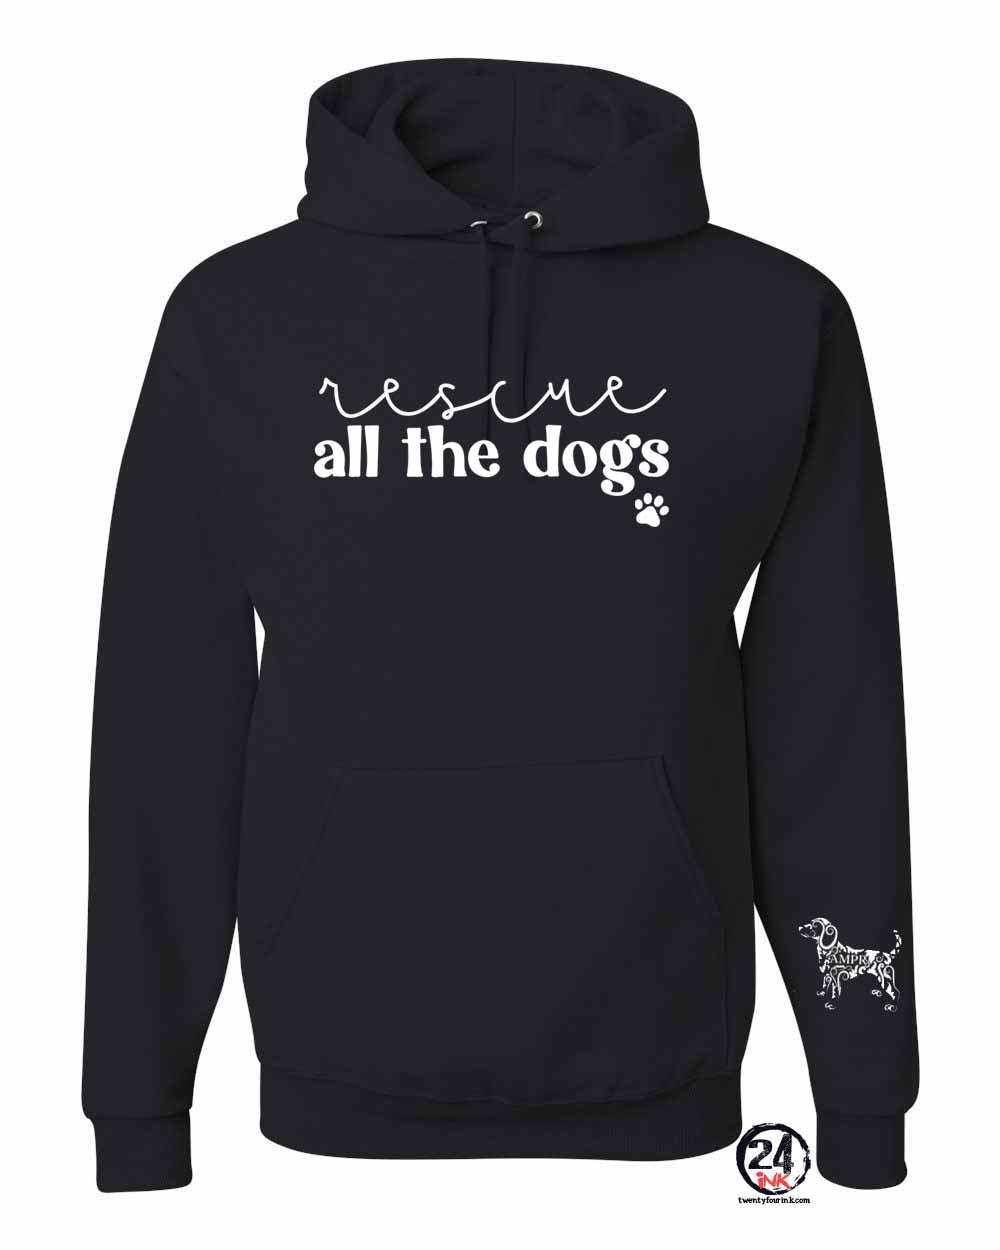 Rescue all the dogs Hooded Sweatshirt